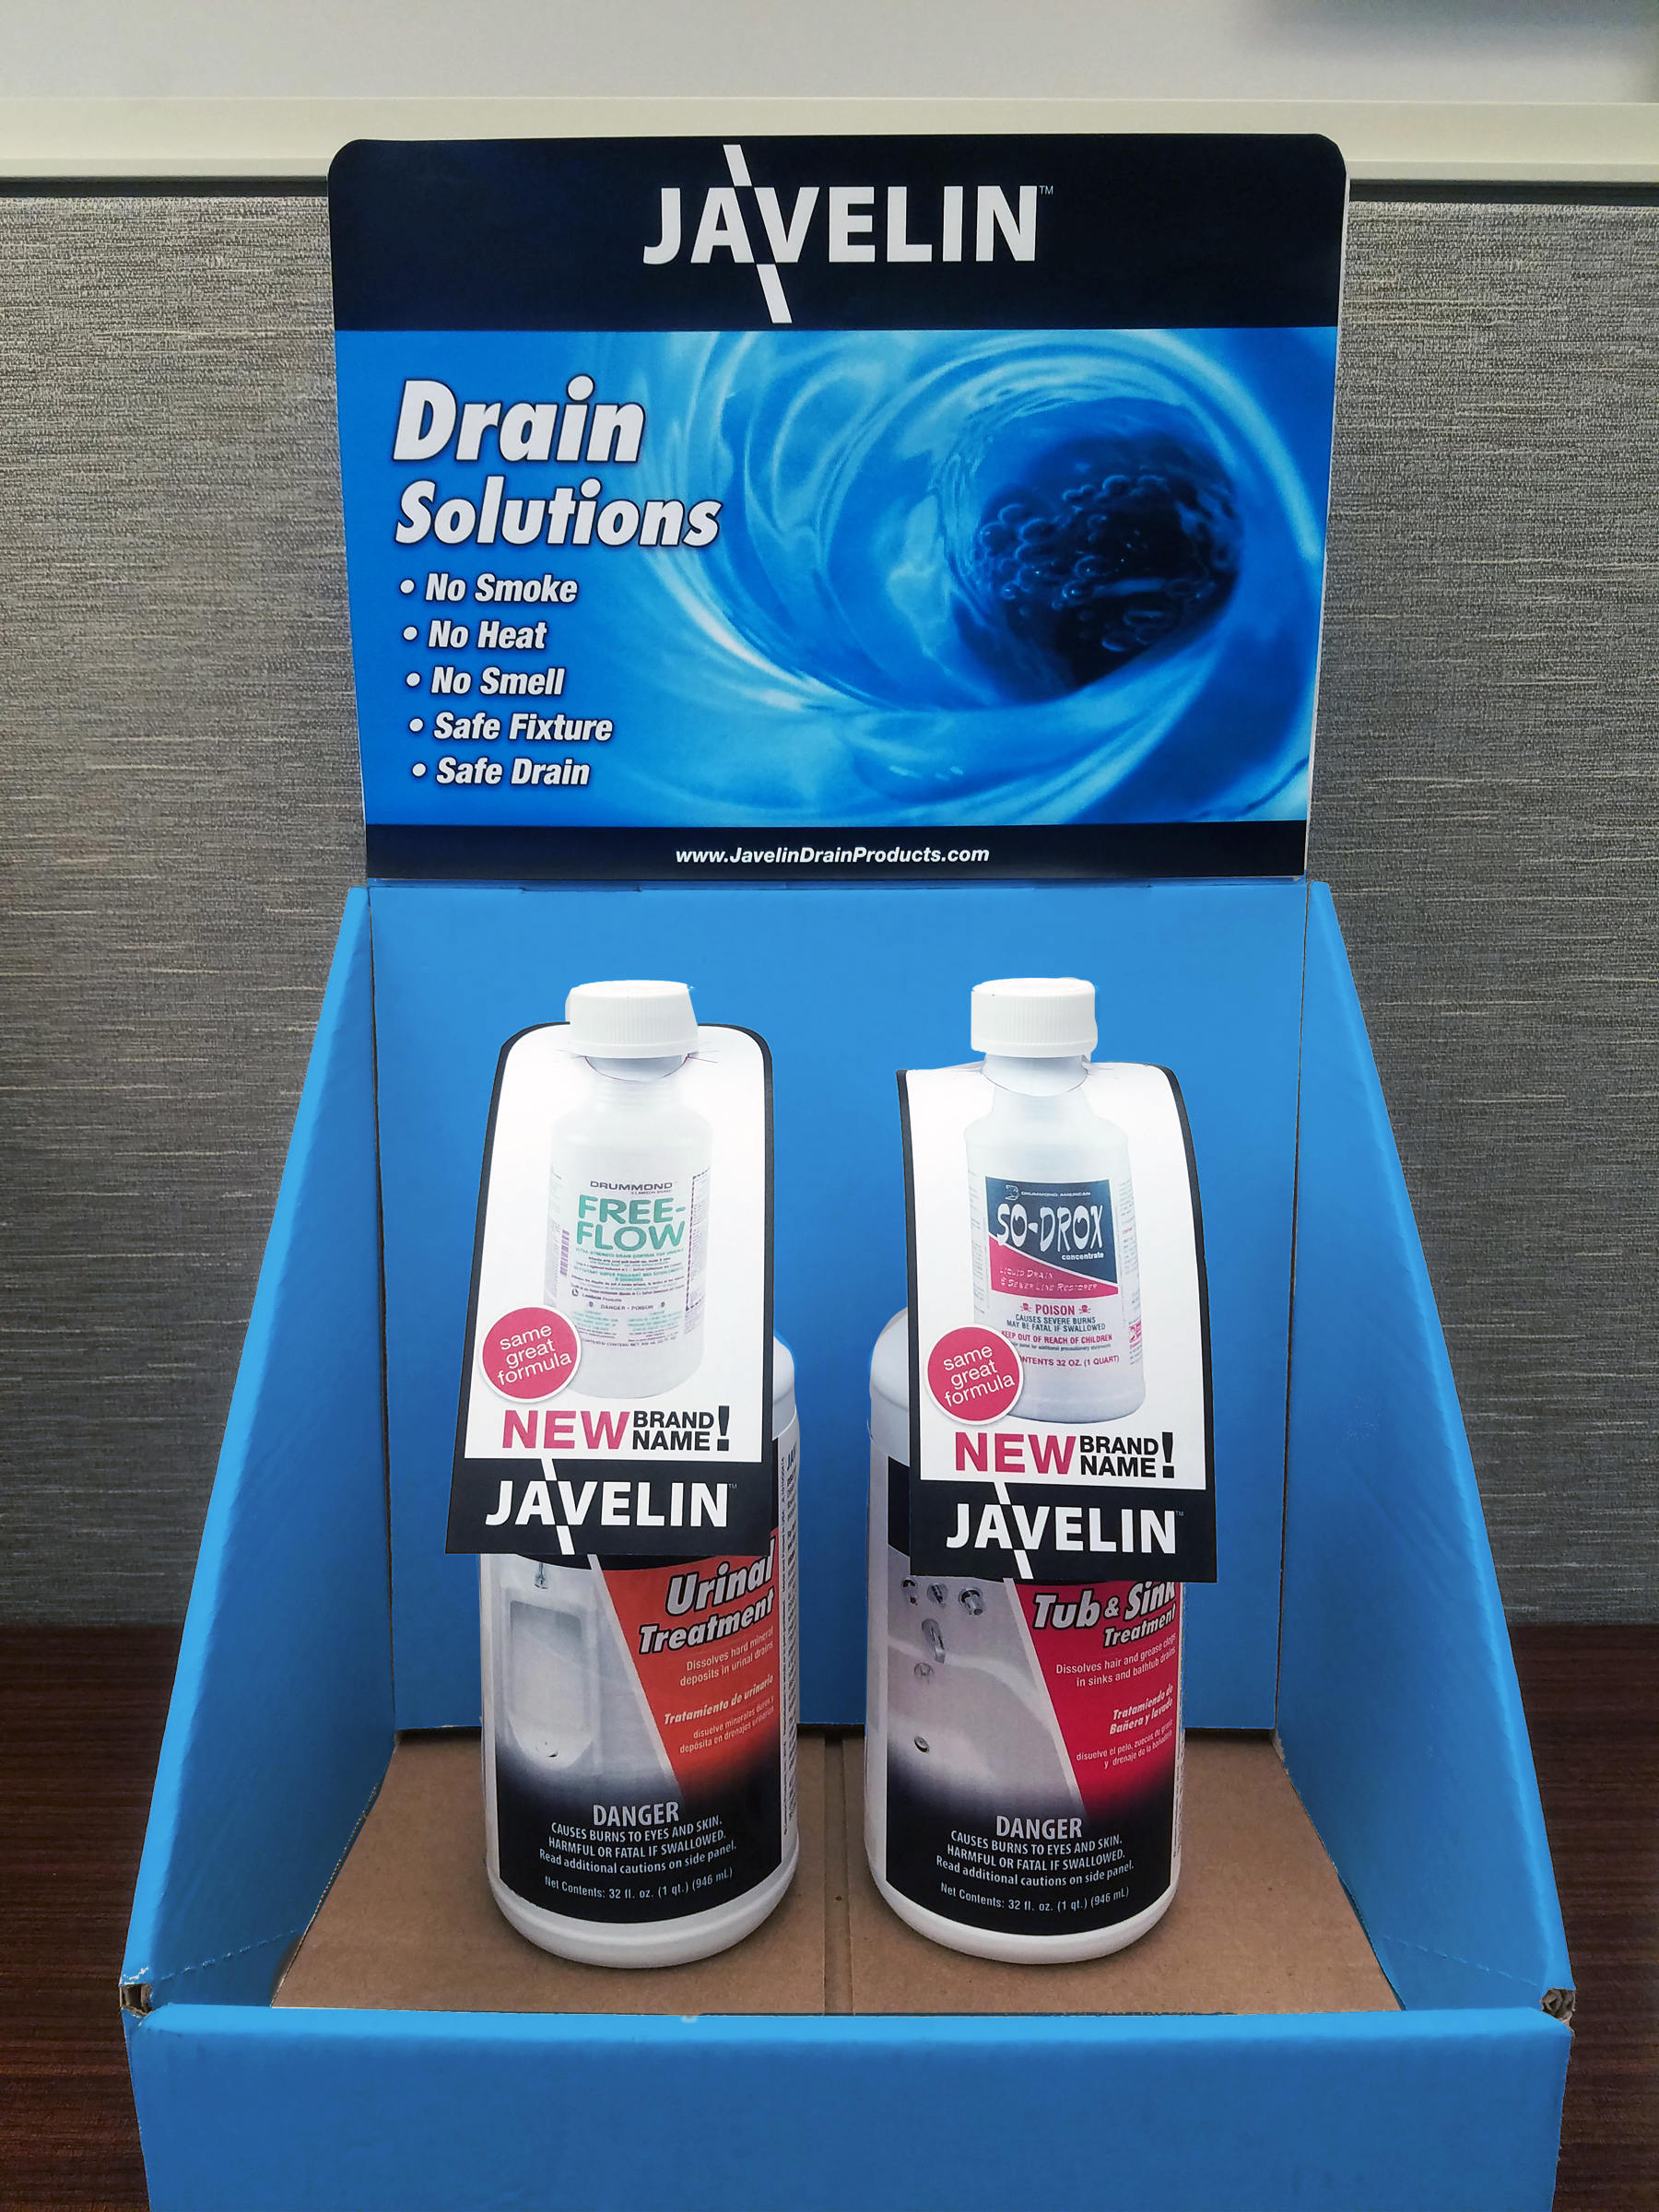 Javelin Drain & Surface Cleaning Products Campaign In-Store Display